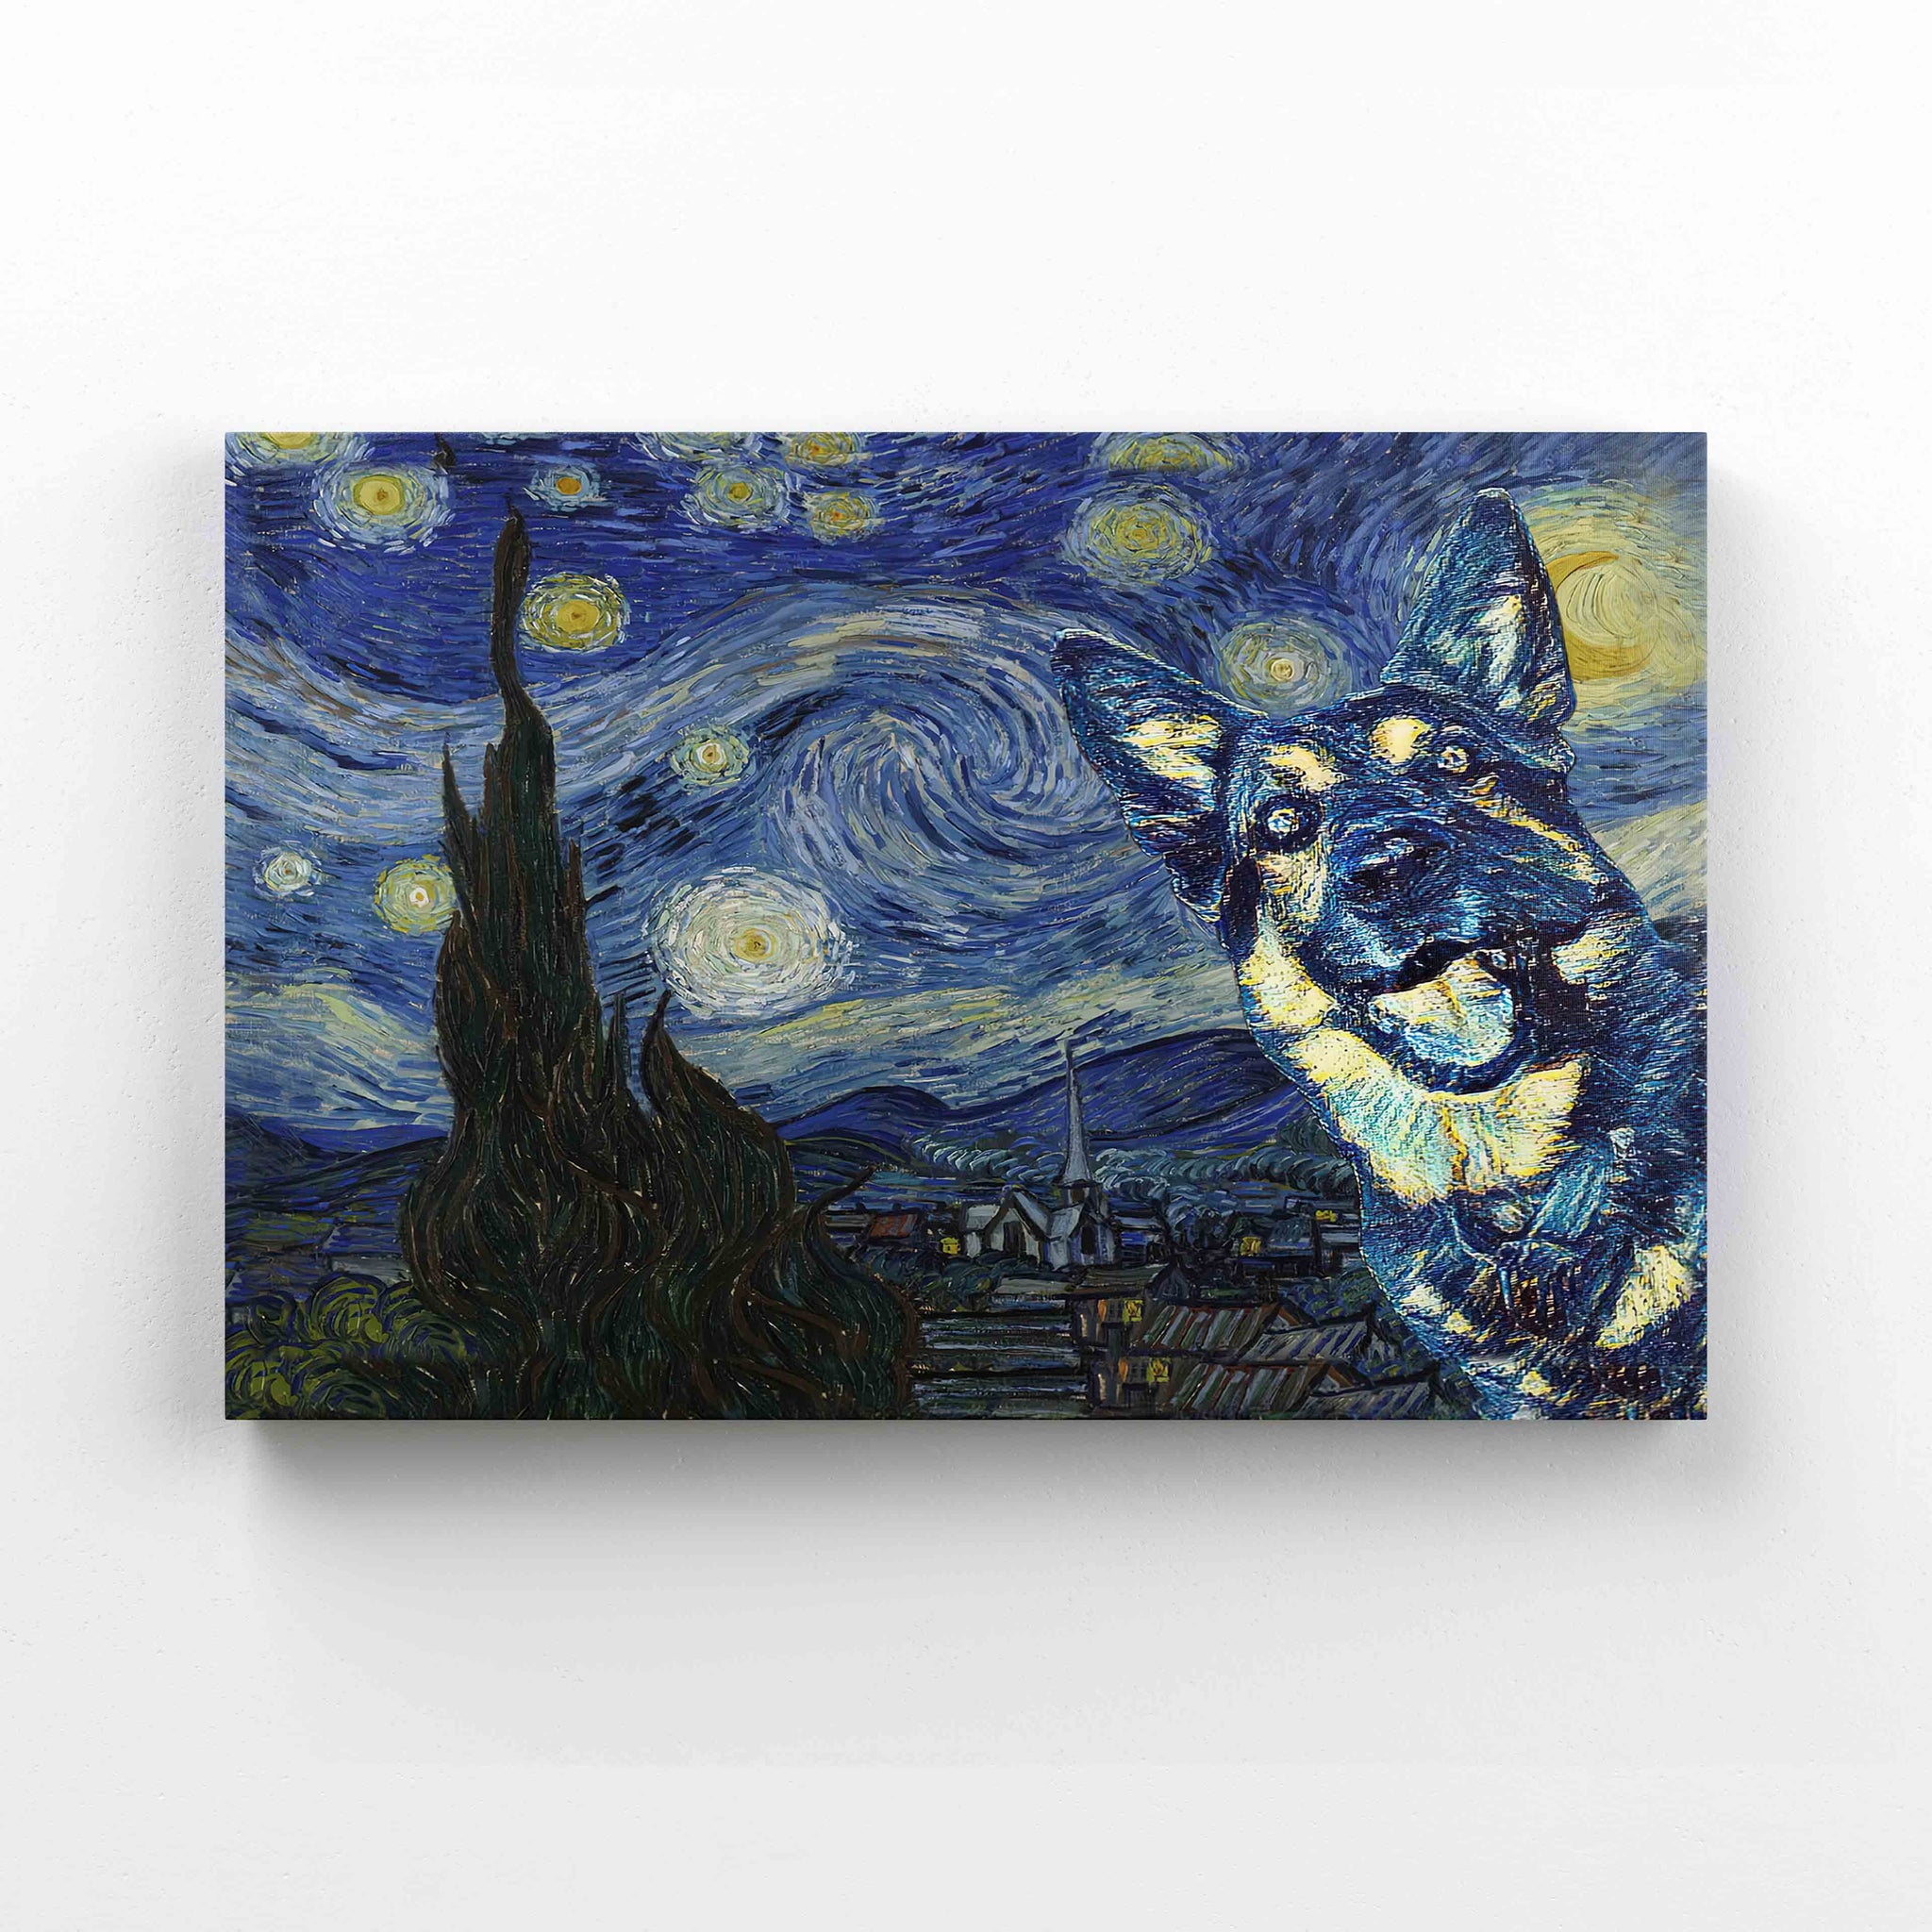 The Starry Night Canvas, German Shepherd Canvas, Painting Canvas, Wall Art Canvas, Gift Canvas